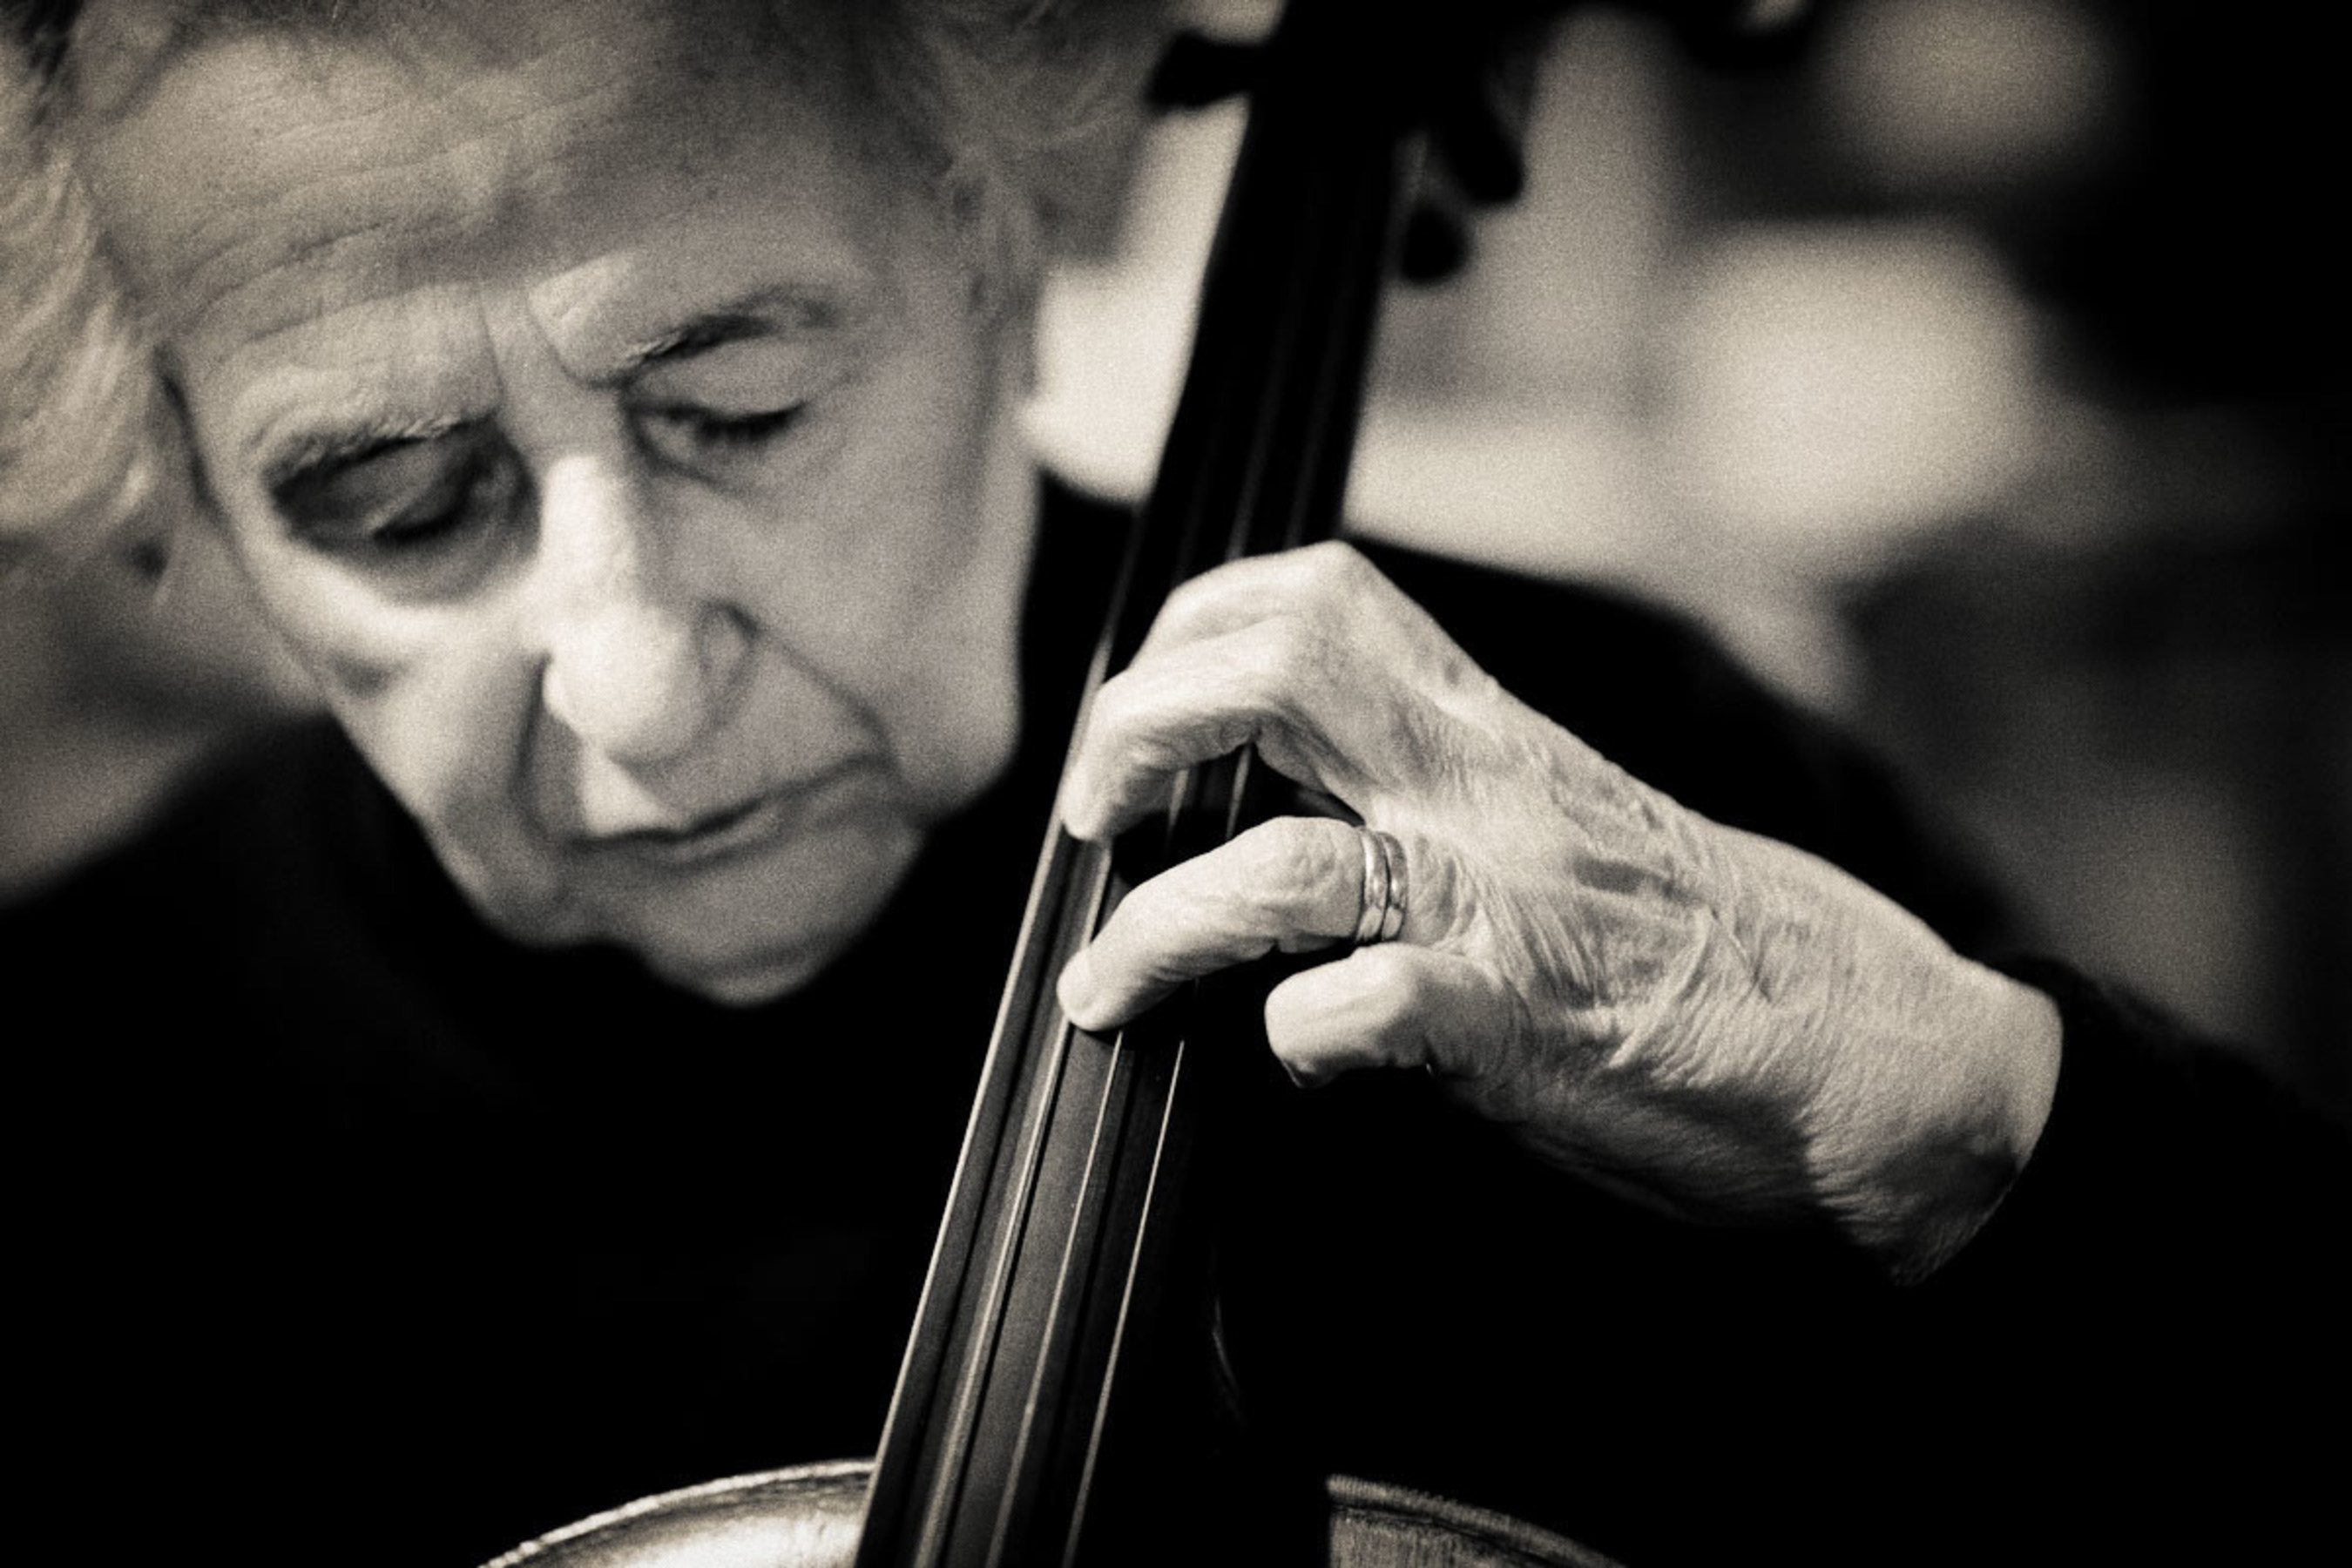 Anita Lasker-Wallfisch, whose talent at playing the cello helped spare her life at the Auschwitz death camp has picked up her instrument for the first time in more than a decade to score a new documentary that debuted at the official 70th anniversary commemoration at the Auschwitz-Birkenau State Museum on Jan. 27.